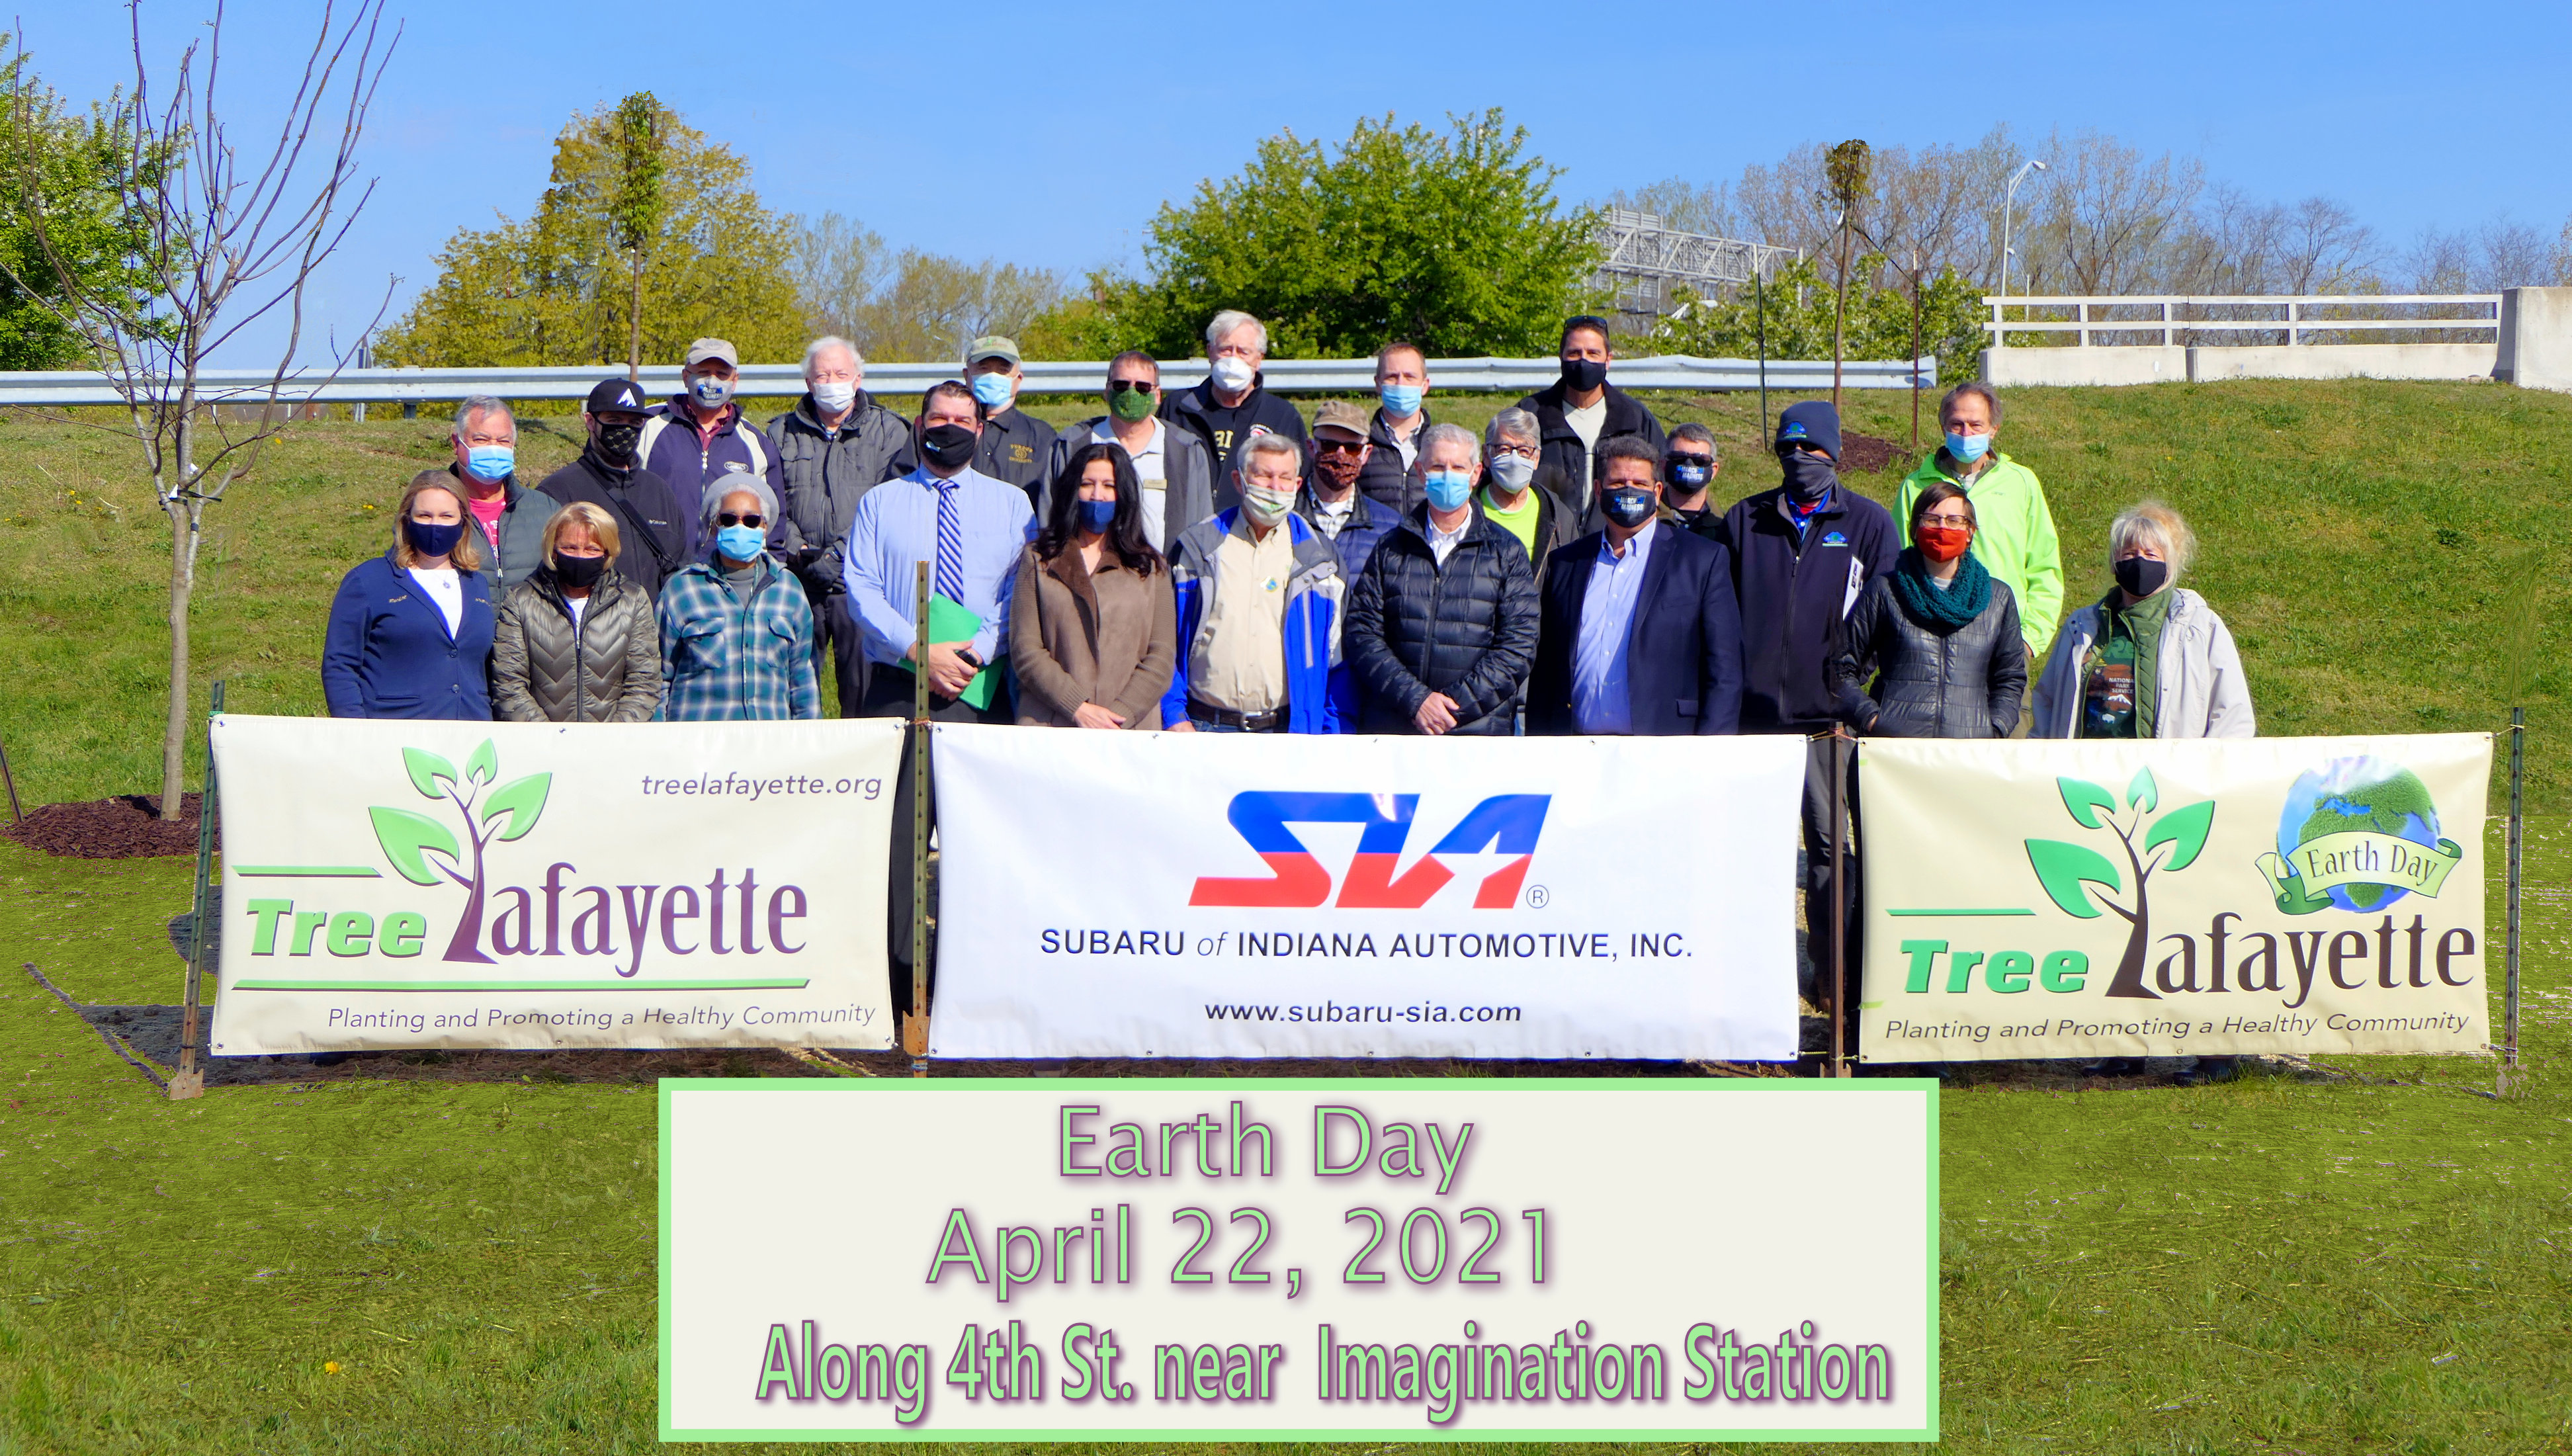 Earth Day 2021 group photo